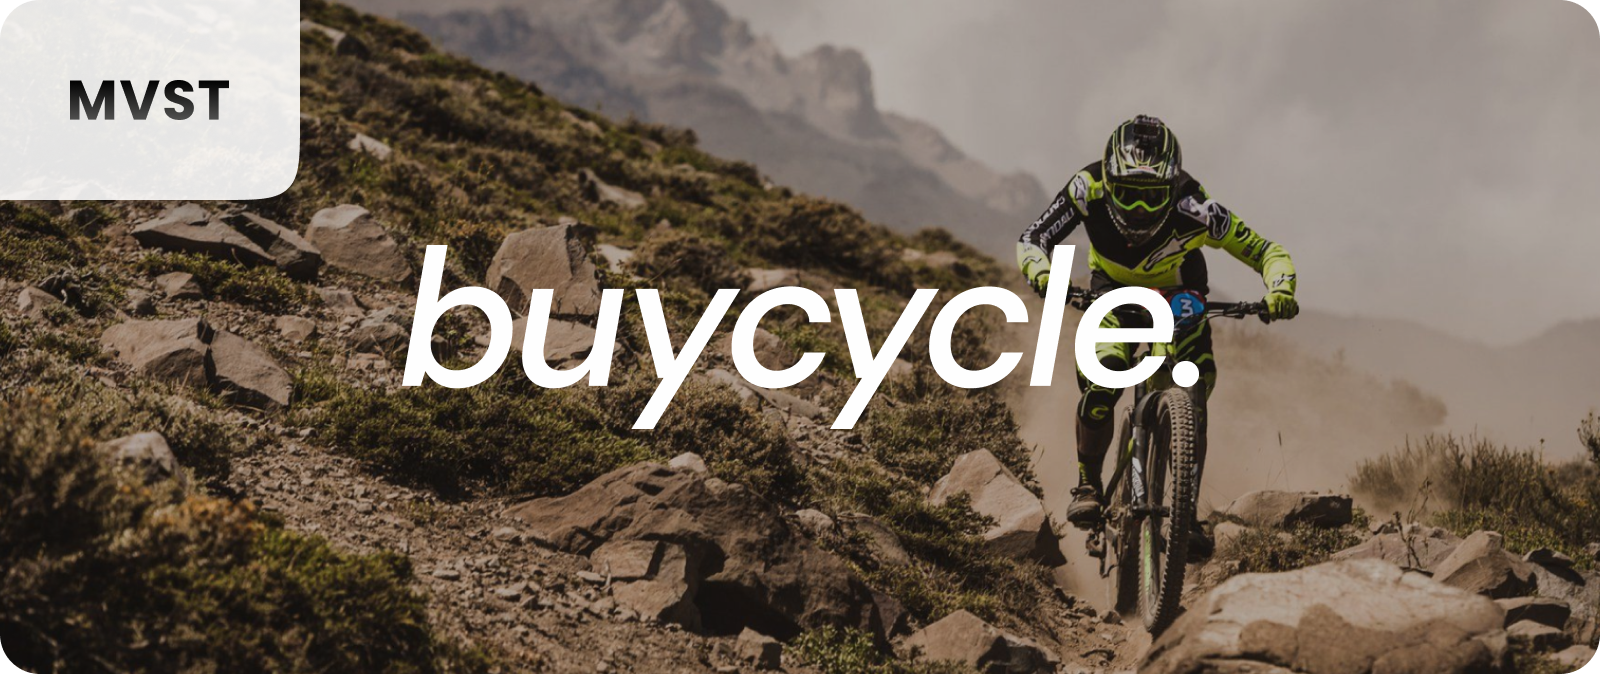 Pedaling Towards Excellence: How Brand Positioning Powered buycycle's Stellar Website and Mobile App